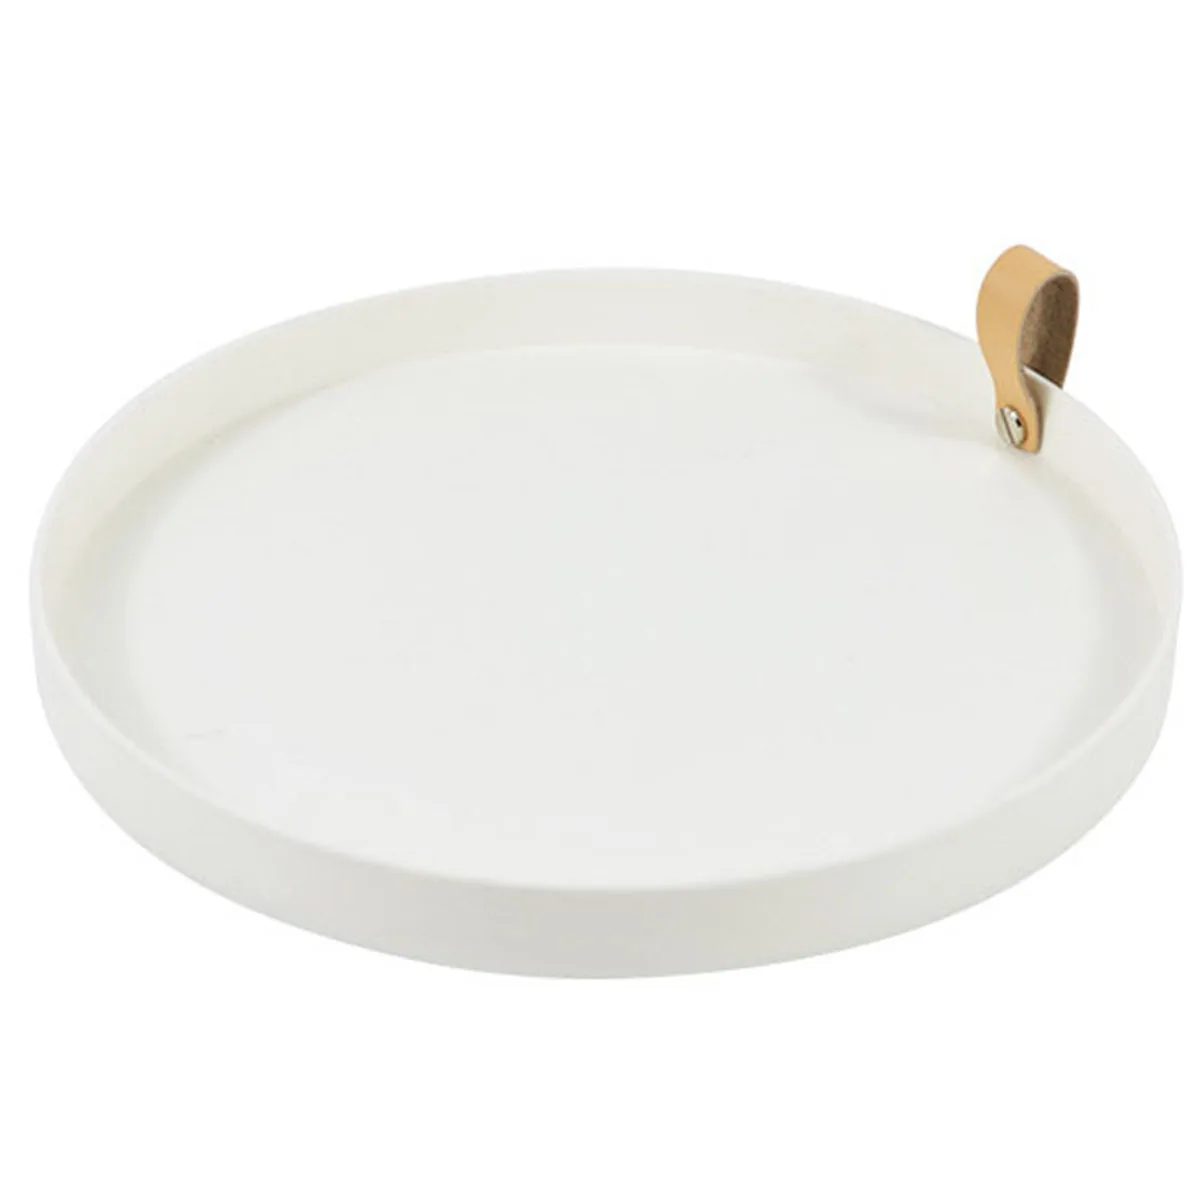 

Round Plastic Tray Sturdy Food Serving Tray Lightweight Desktop Storage Tray with Leather Handle Safe Jewelry Display Tray